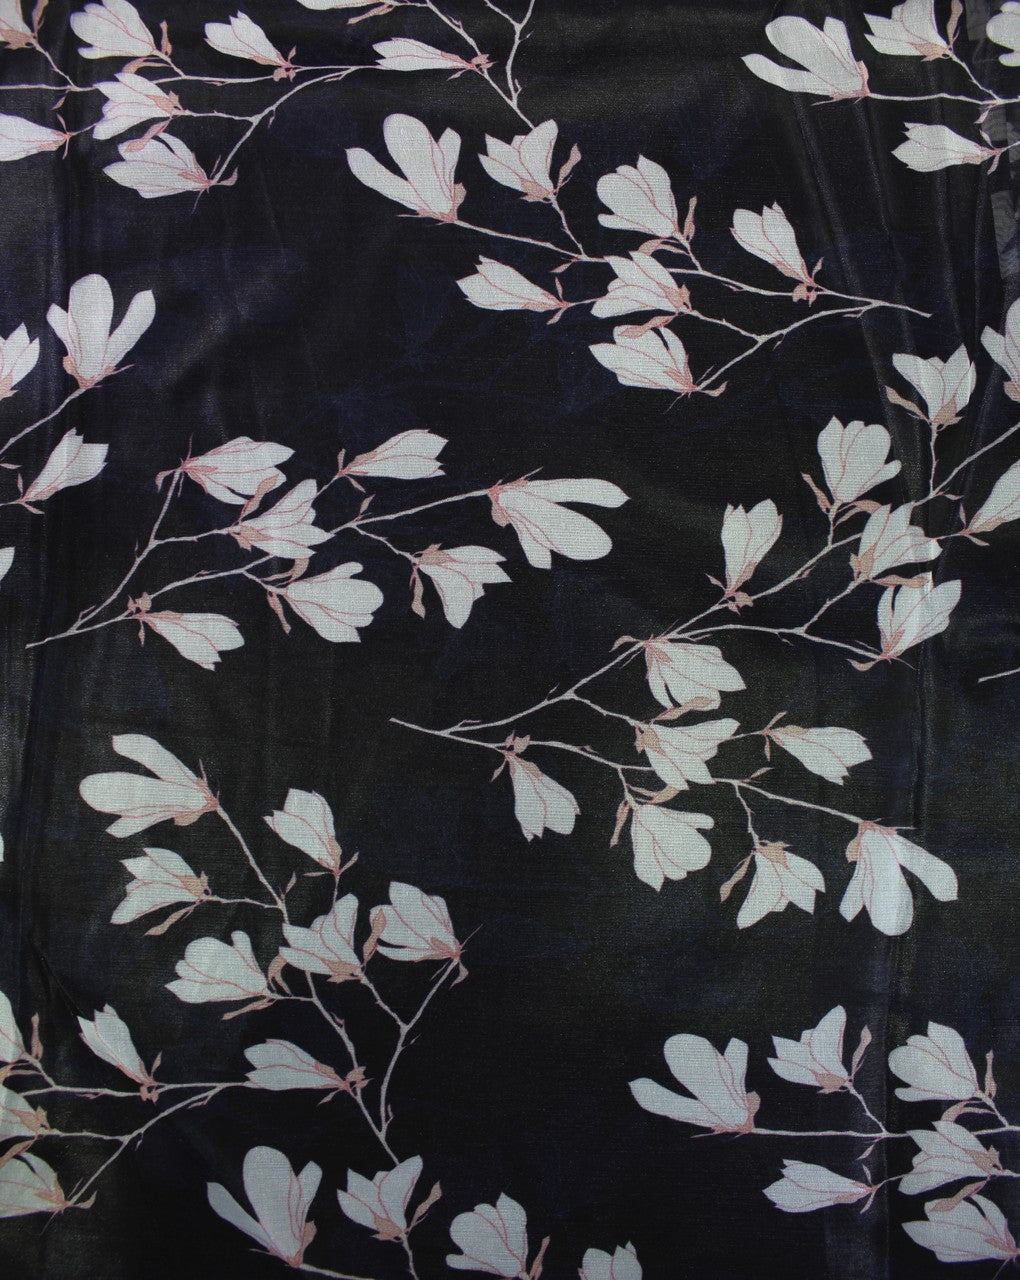 Black And White Floral Design Polyester Organza Fabric